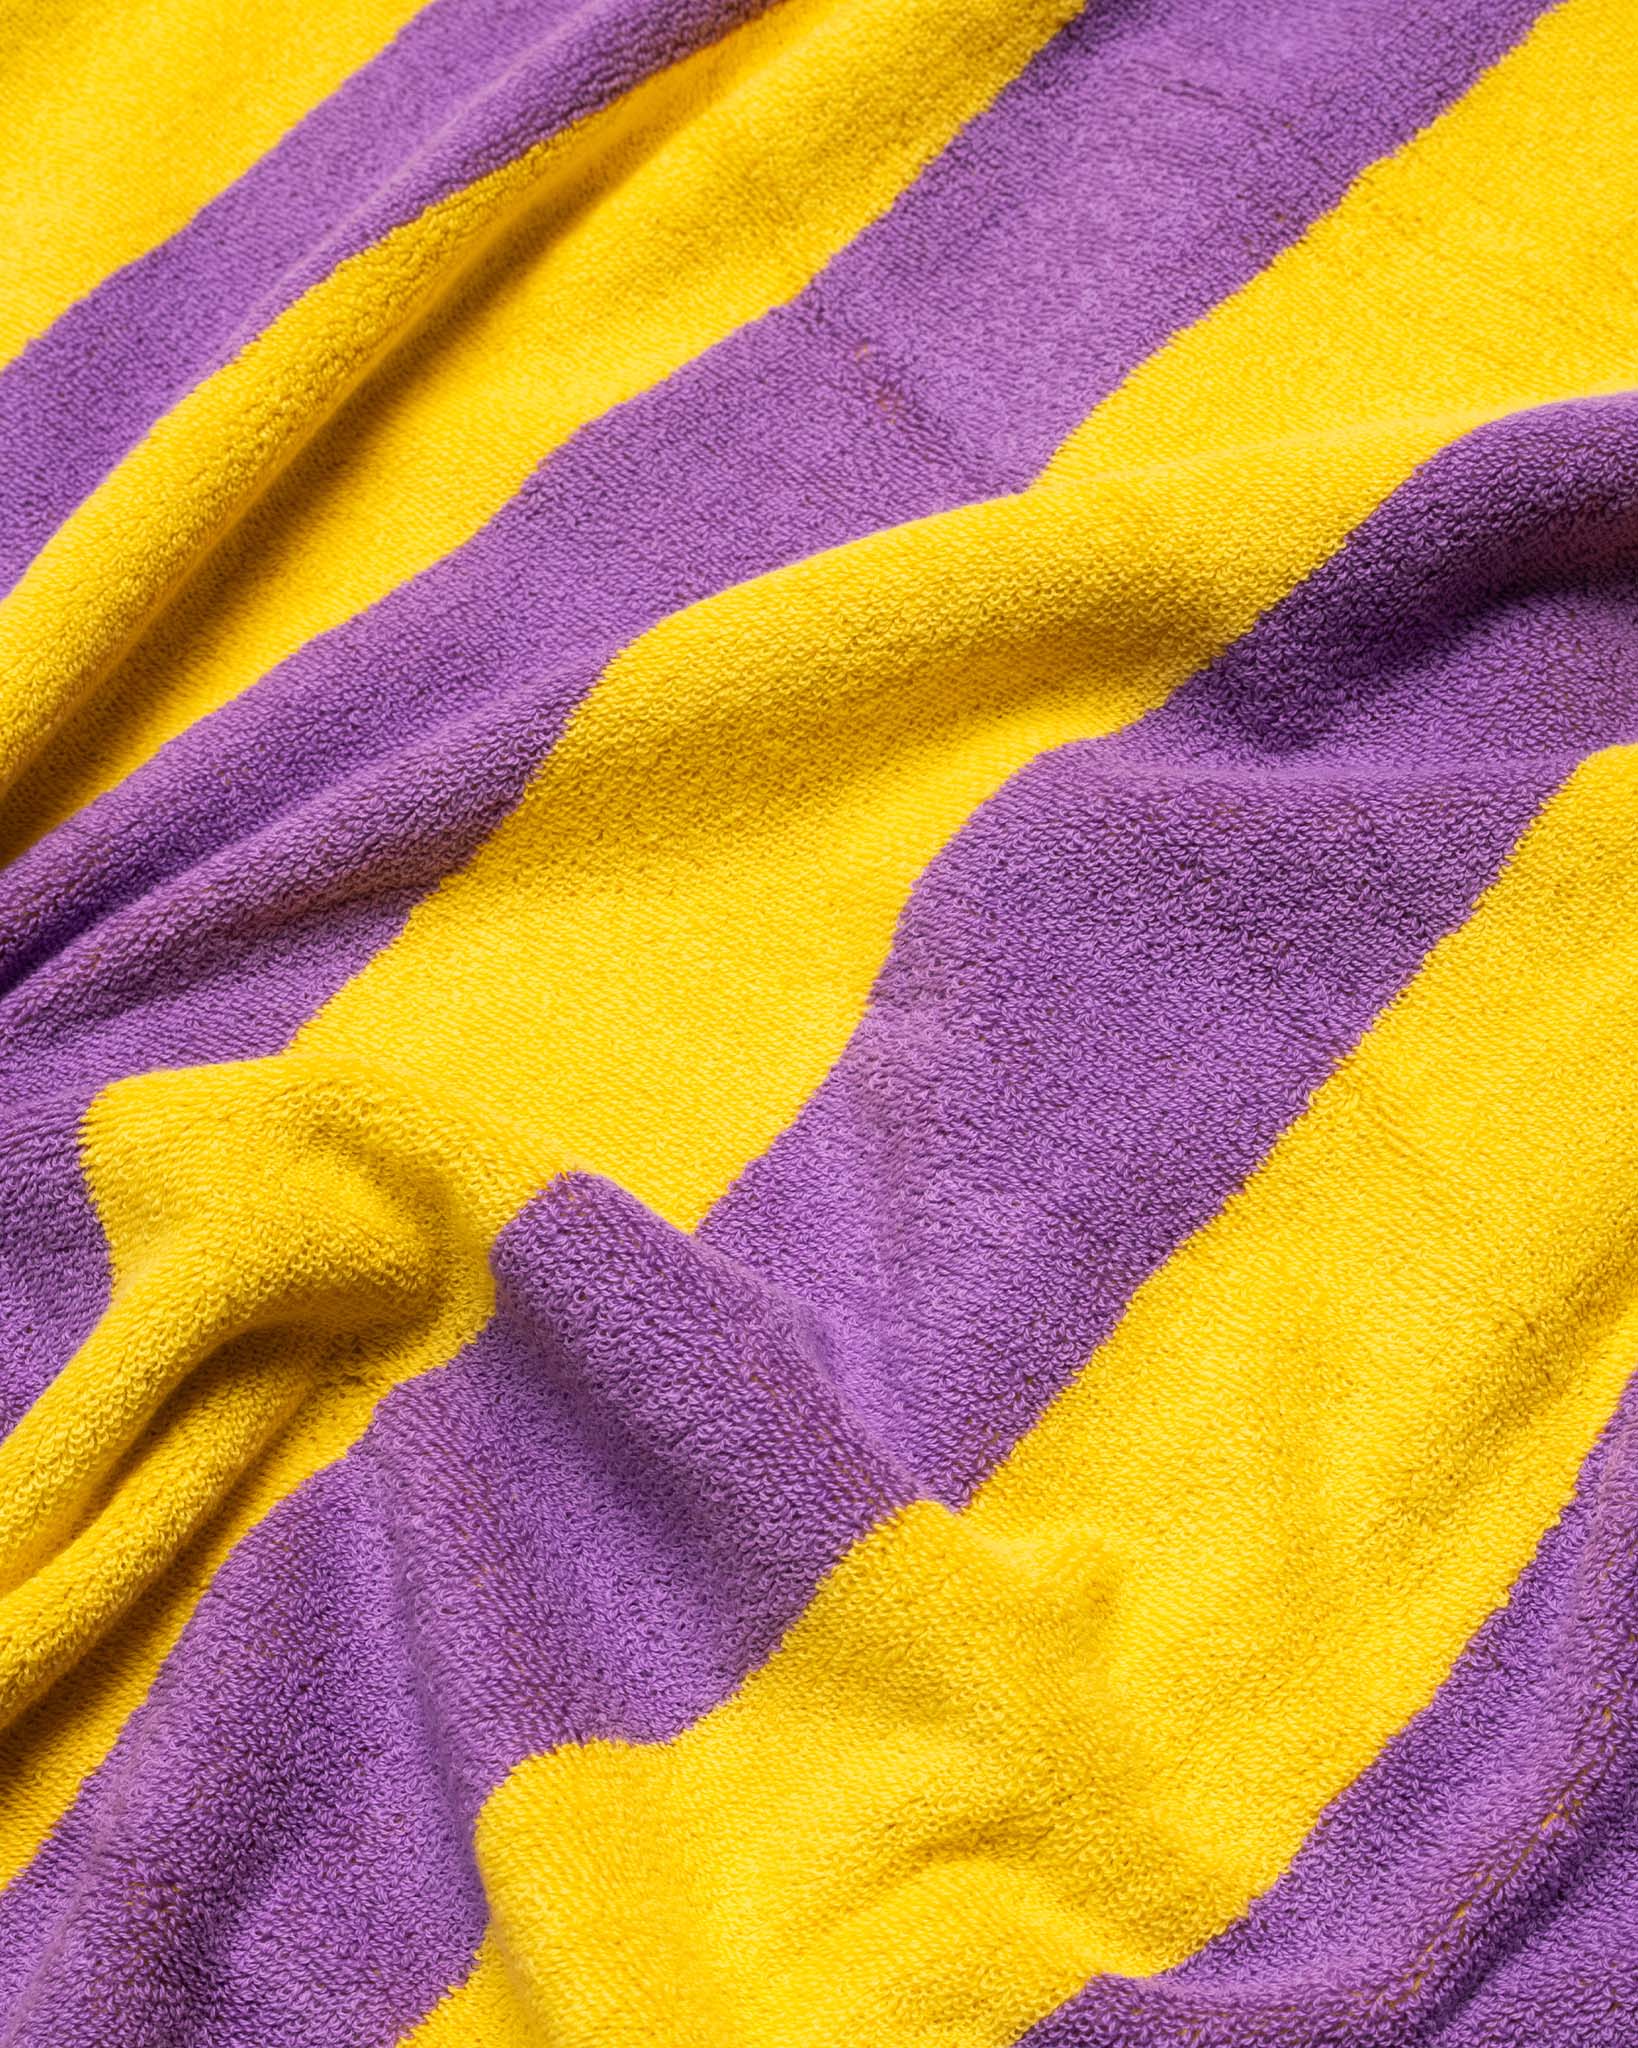 A wrinkled purple and yellow striped towel. 